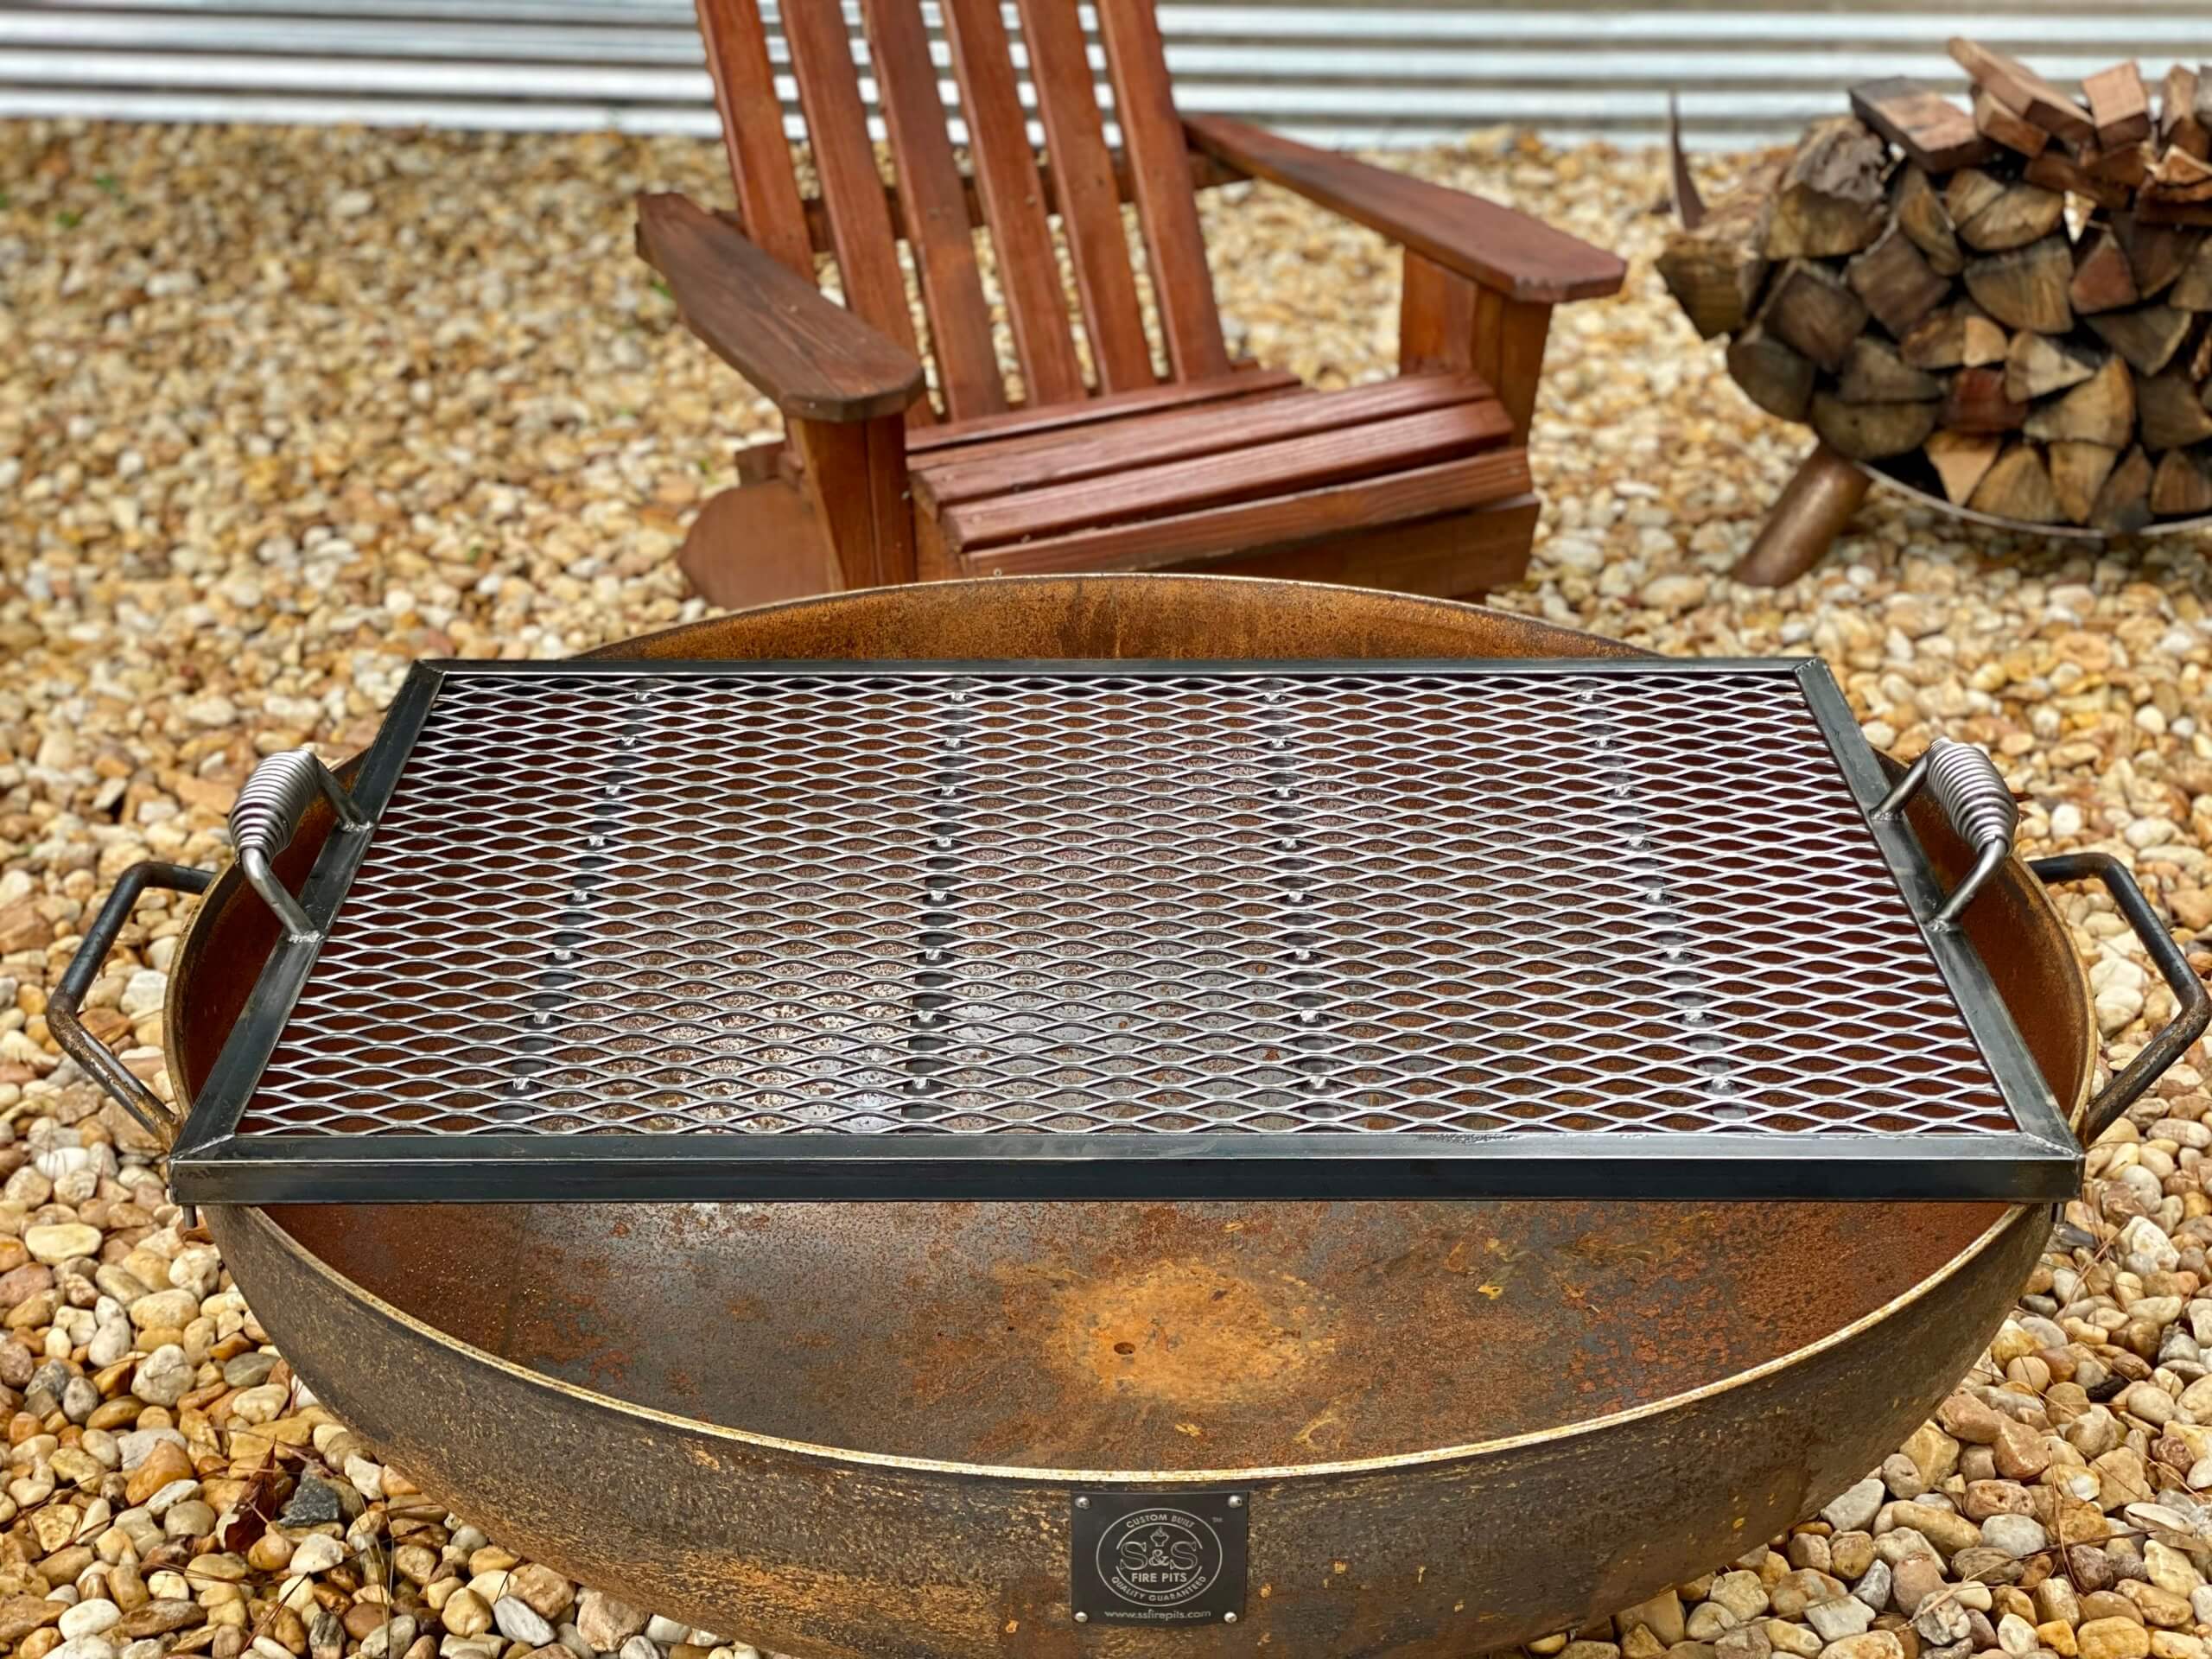 42" Heavy Duty Handcrafted Fire Pit Cooking Grate